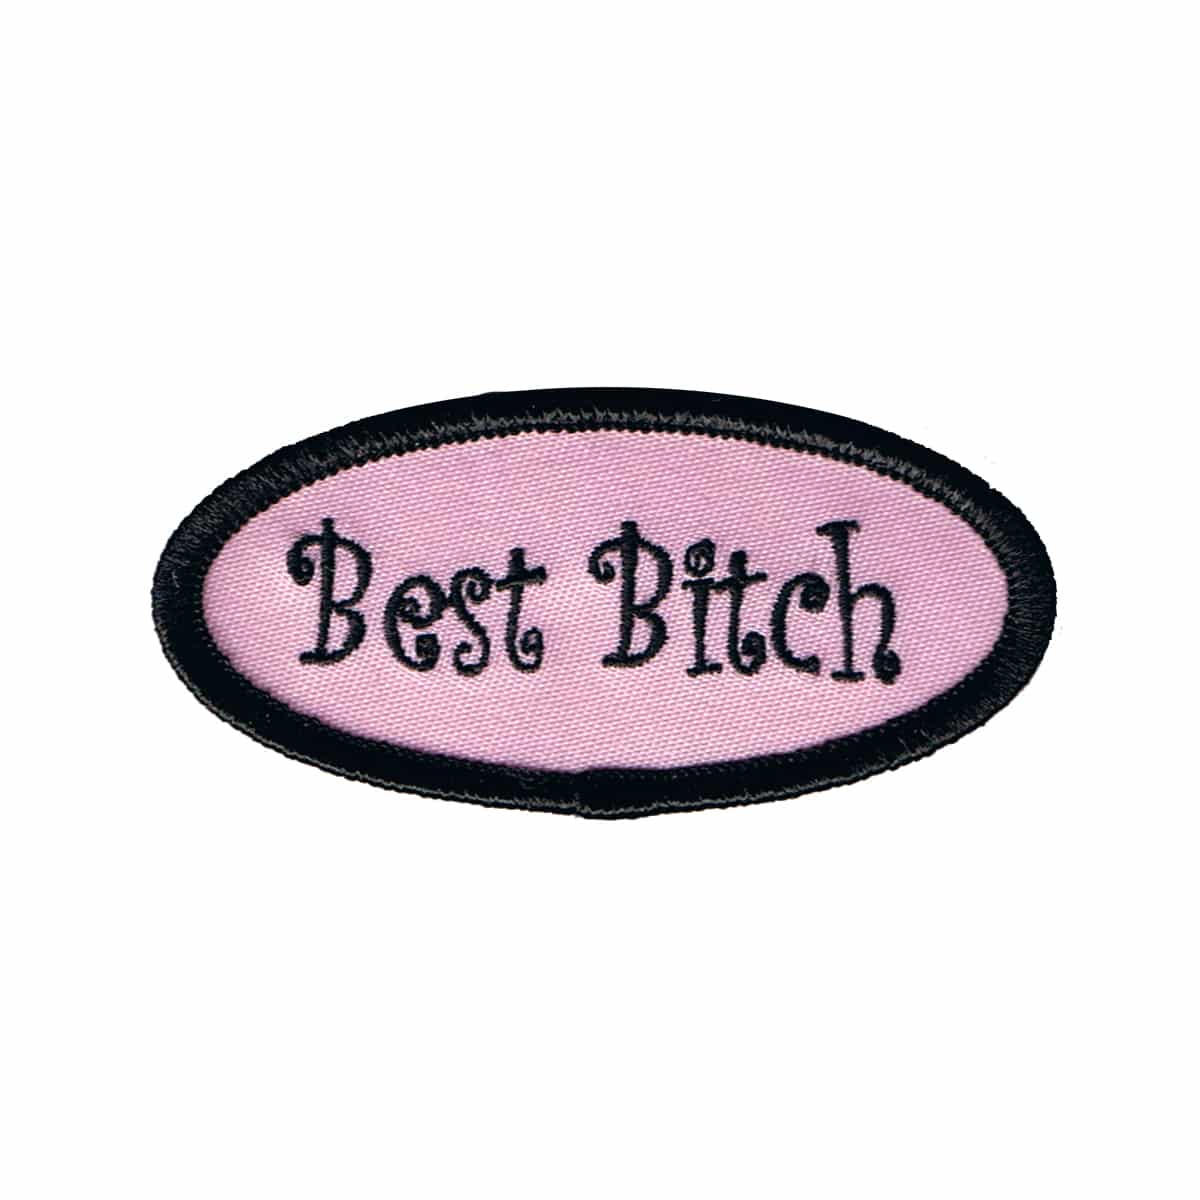 Best Bitch Name Tag Patch